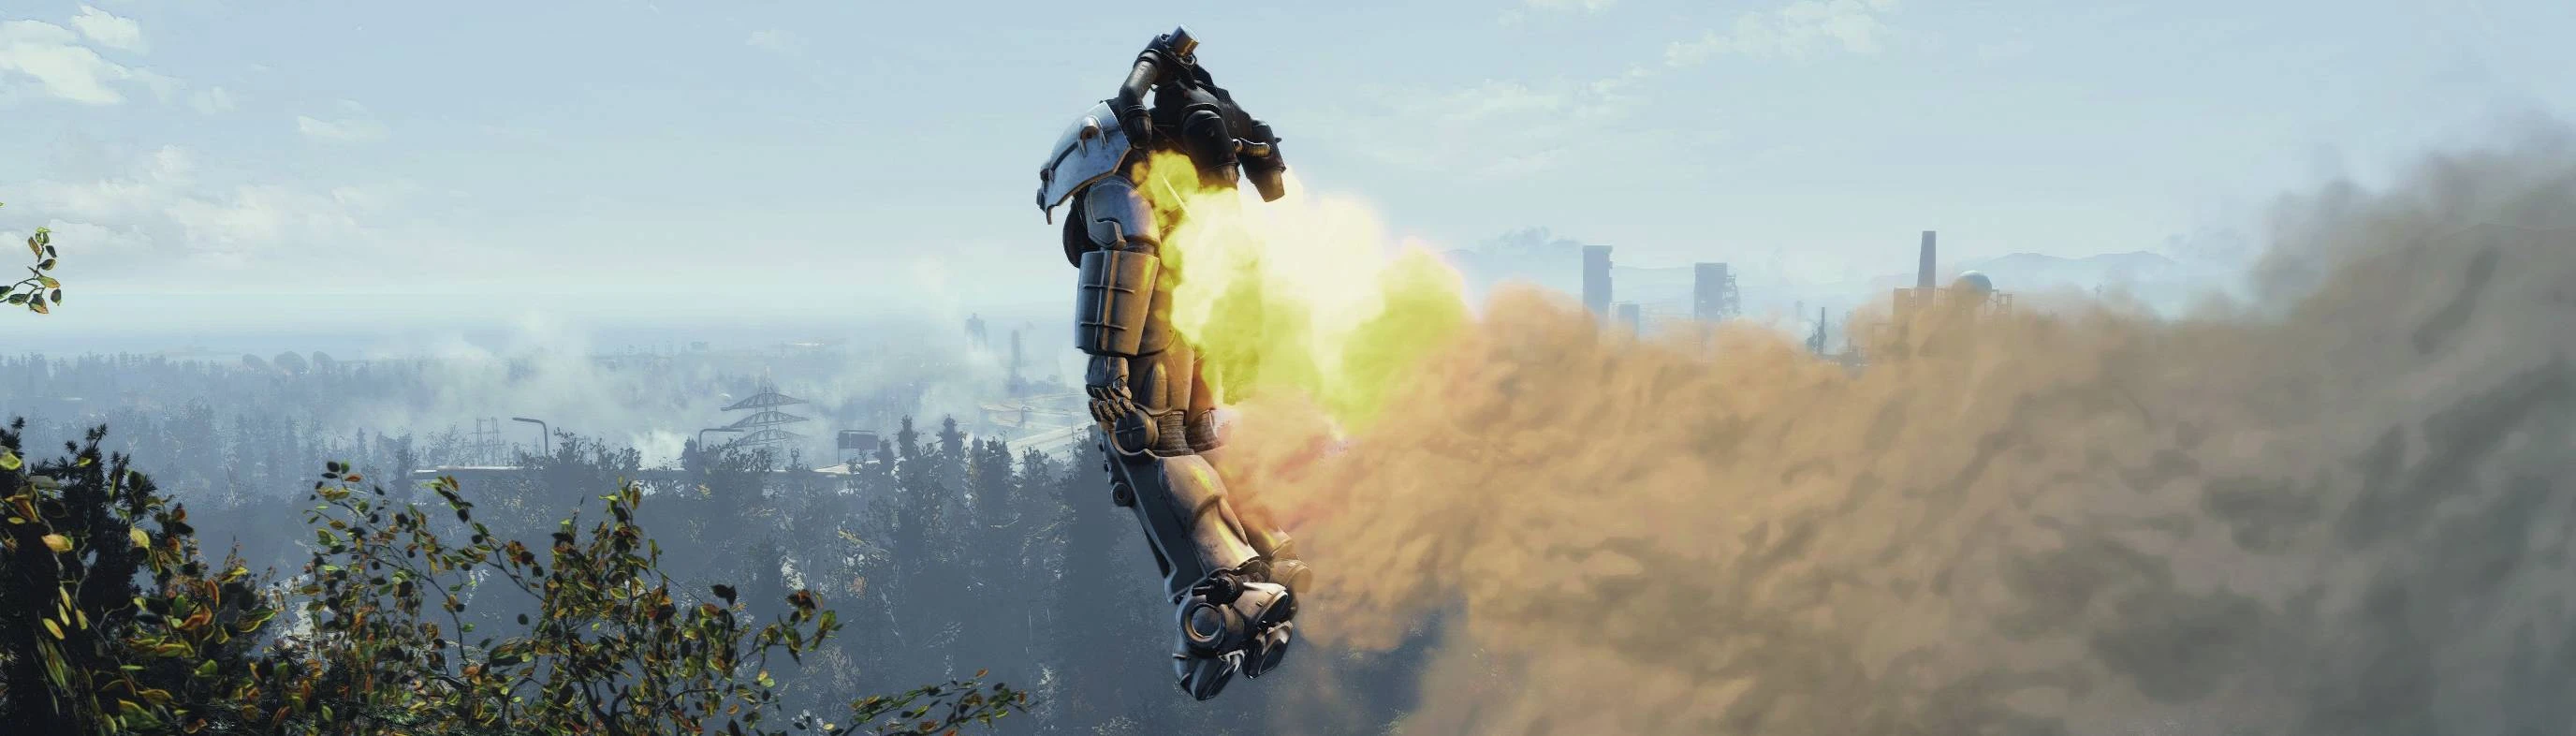 Jetpacks FAO v5 at Fallout 4 Nexus - Mods and community